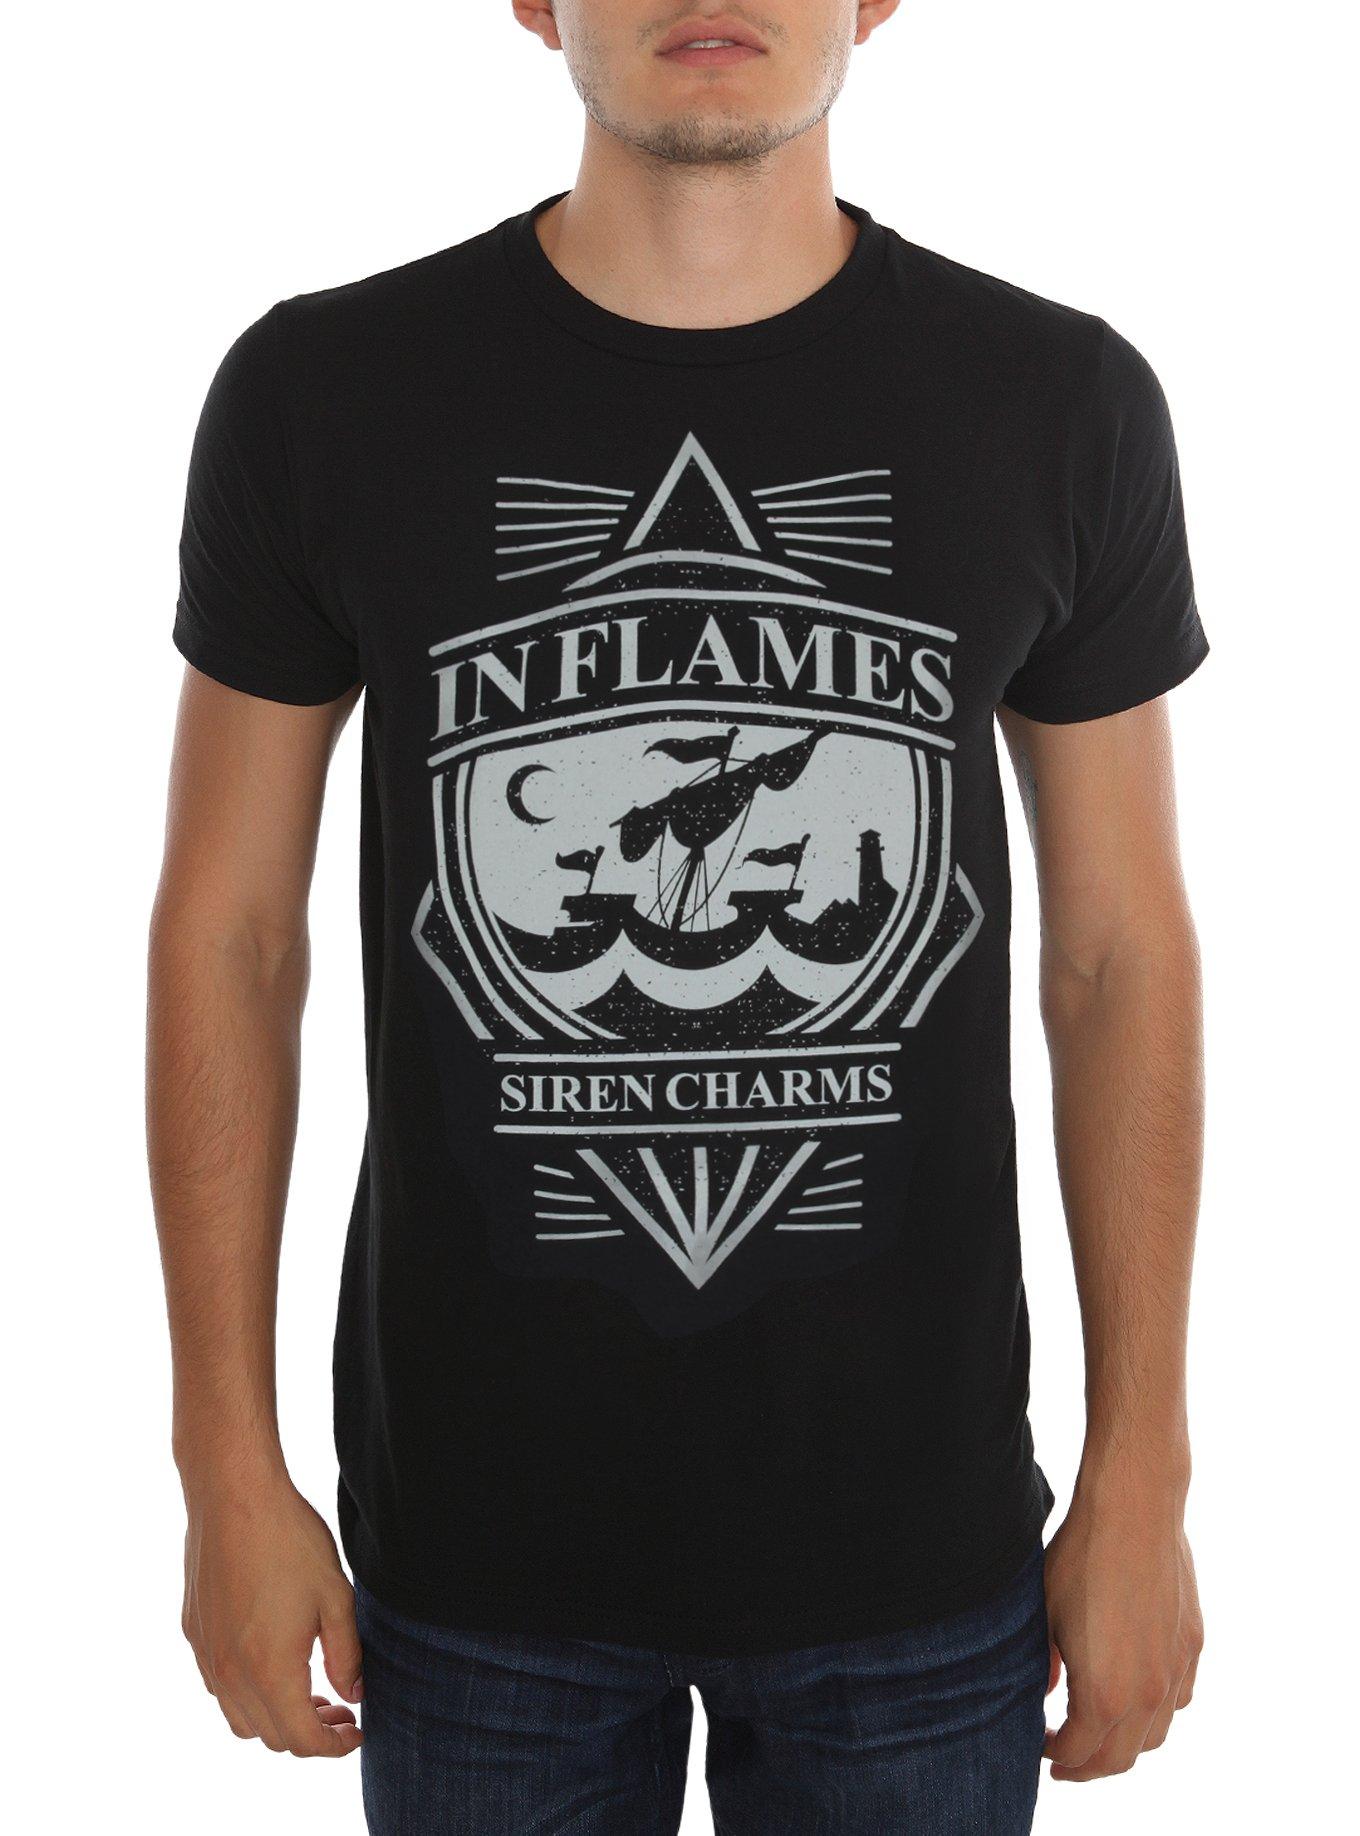 In Flames Siren Charms T-Shirt, BLACK, hi-res